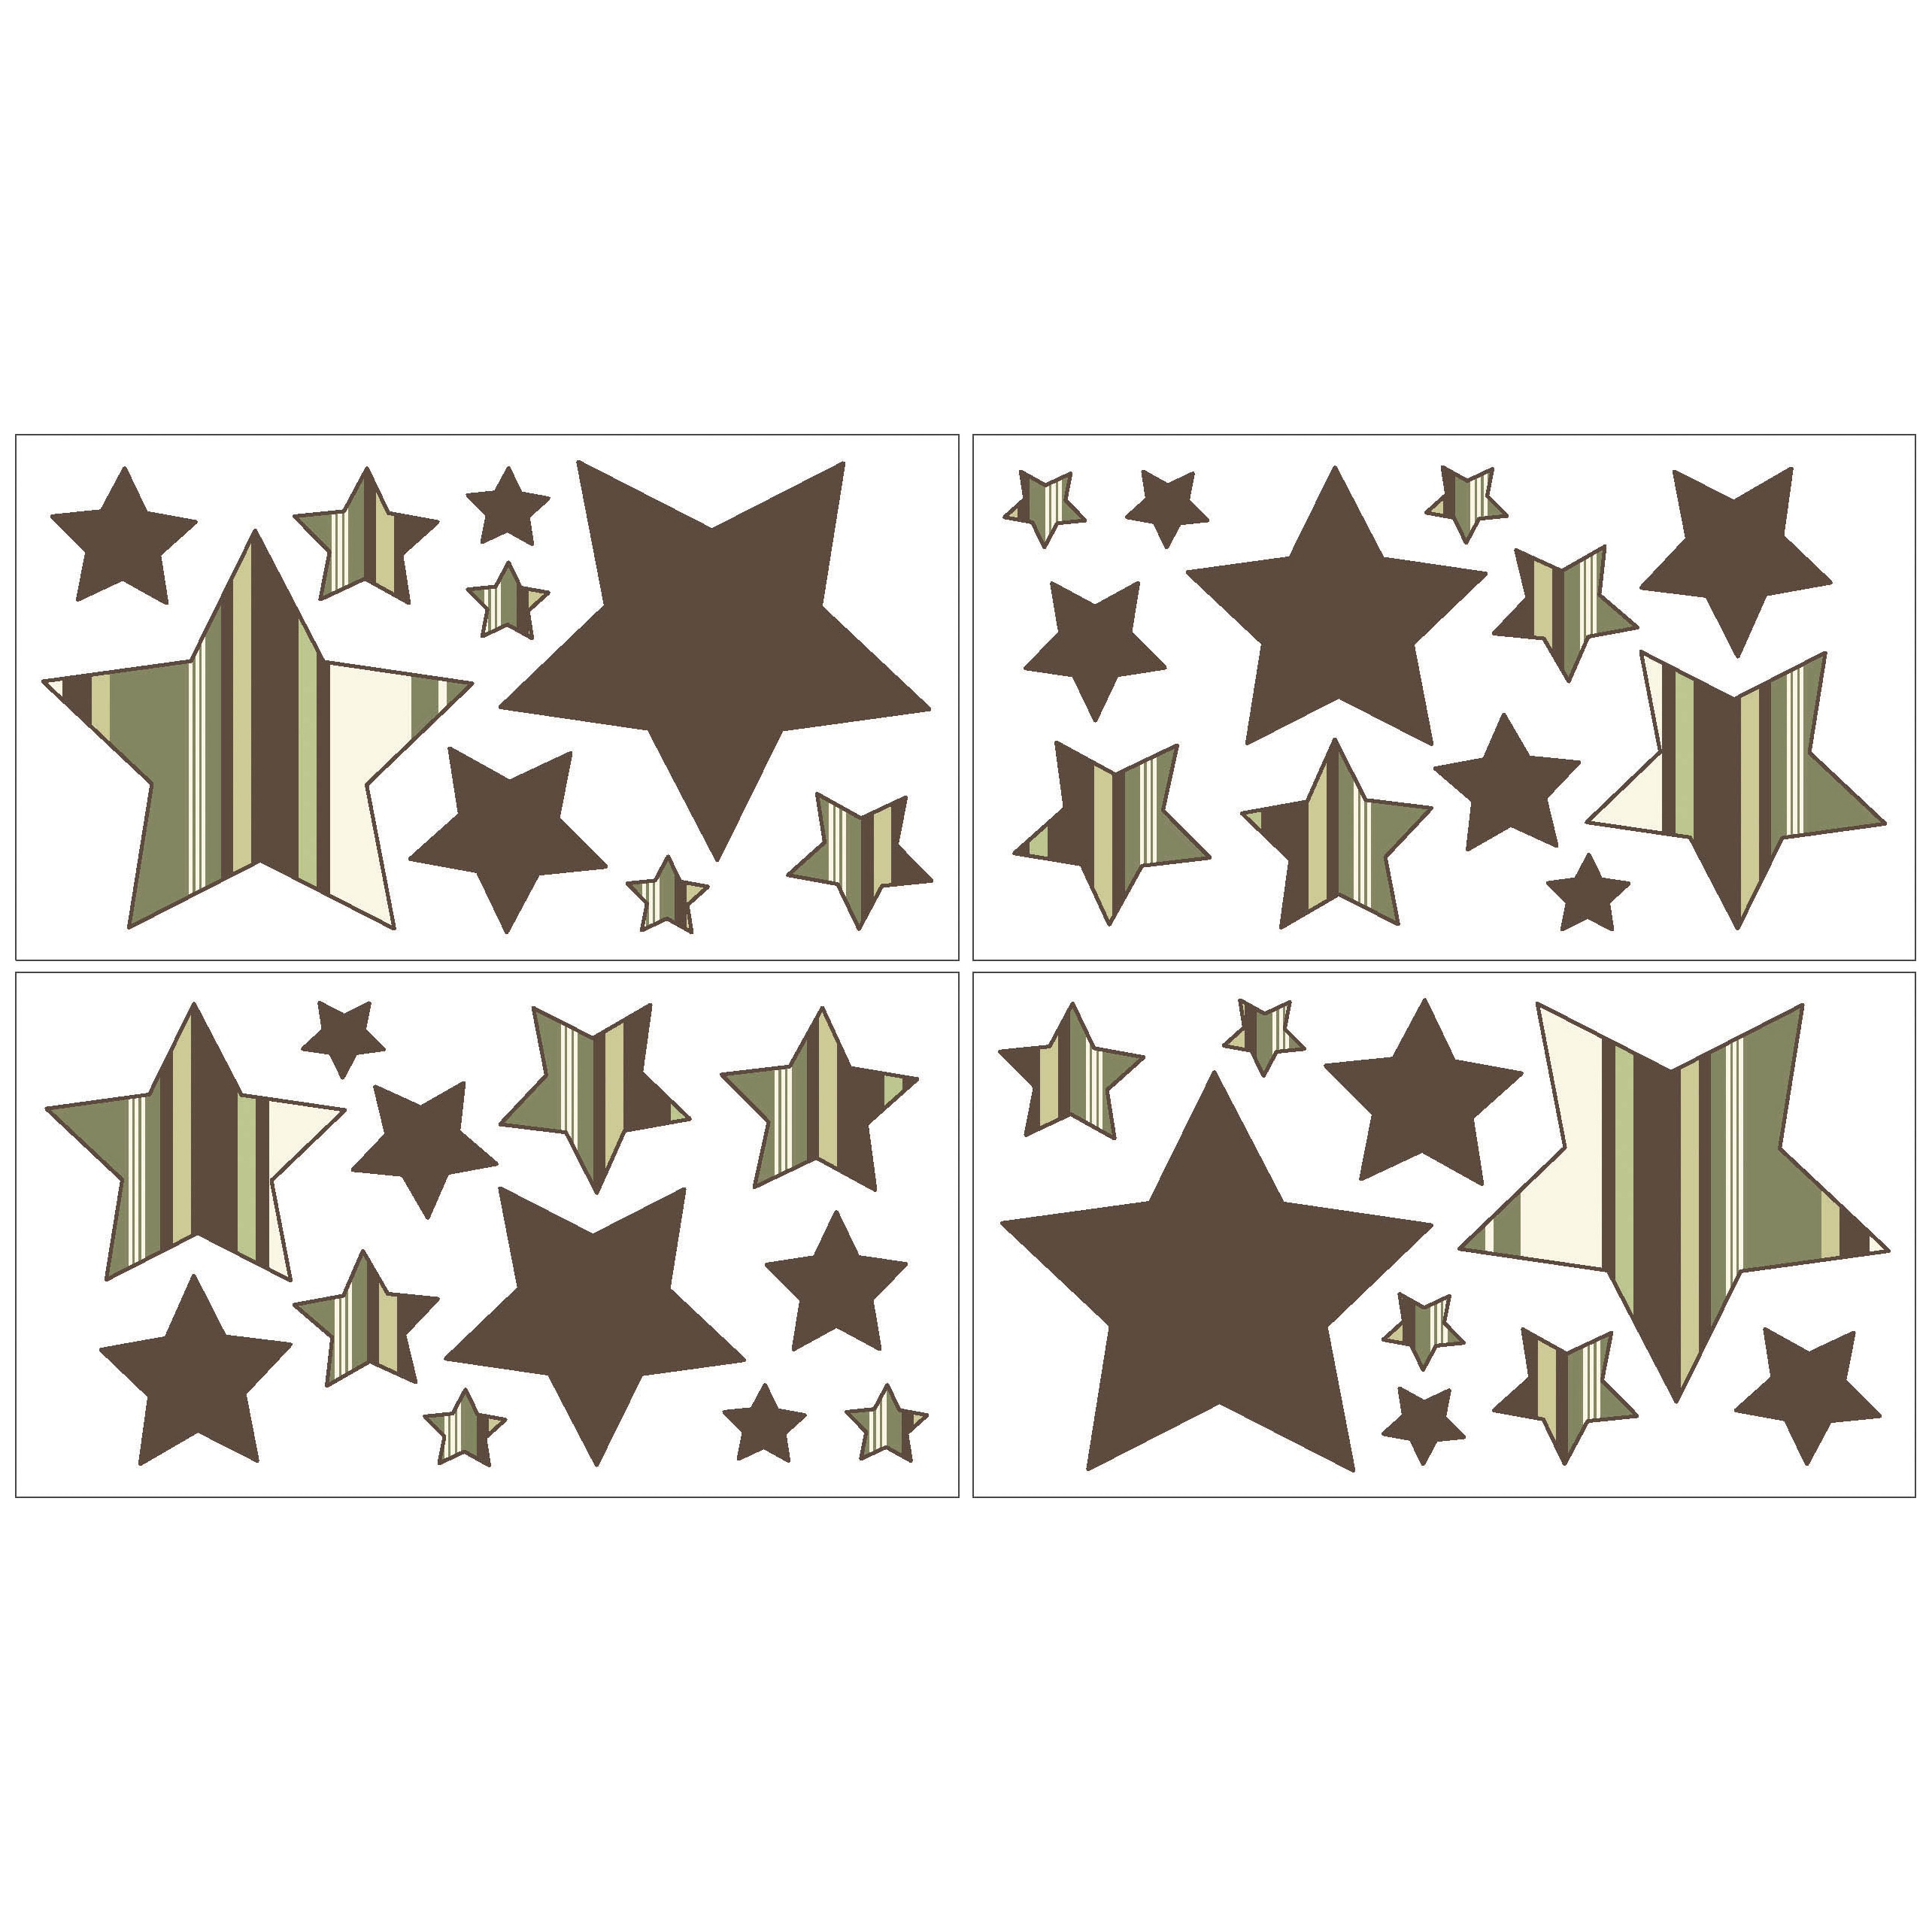 Sweet Jojo Designs Green And Brown Ethan Wall Decal Stickers (set Of 4) (PaperHanging instructions Easy peel and stick backingDimensions (each) 10 inches high x 18 inches wideNOTE These decals are intended for standard flat wall finishes and may not ad